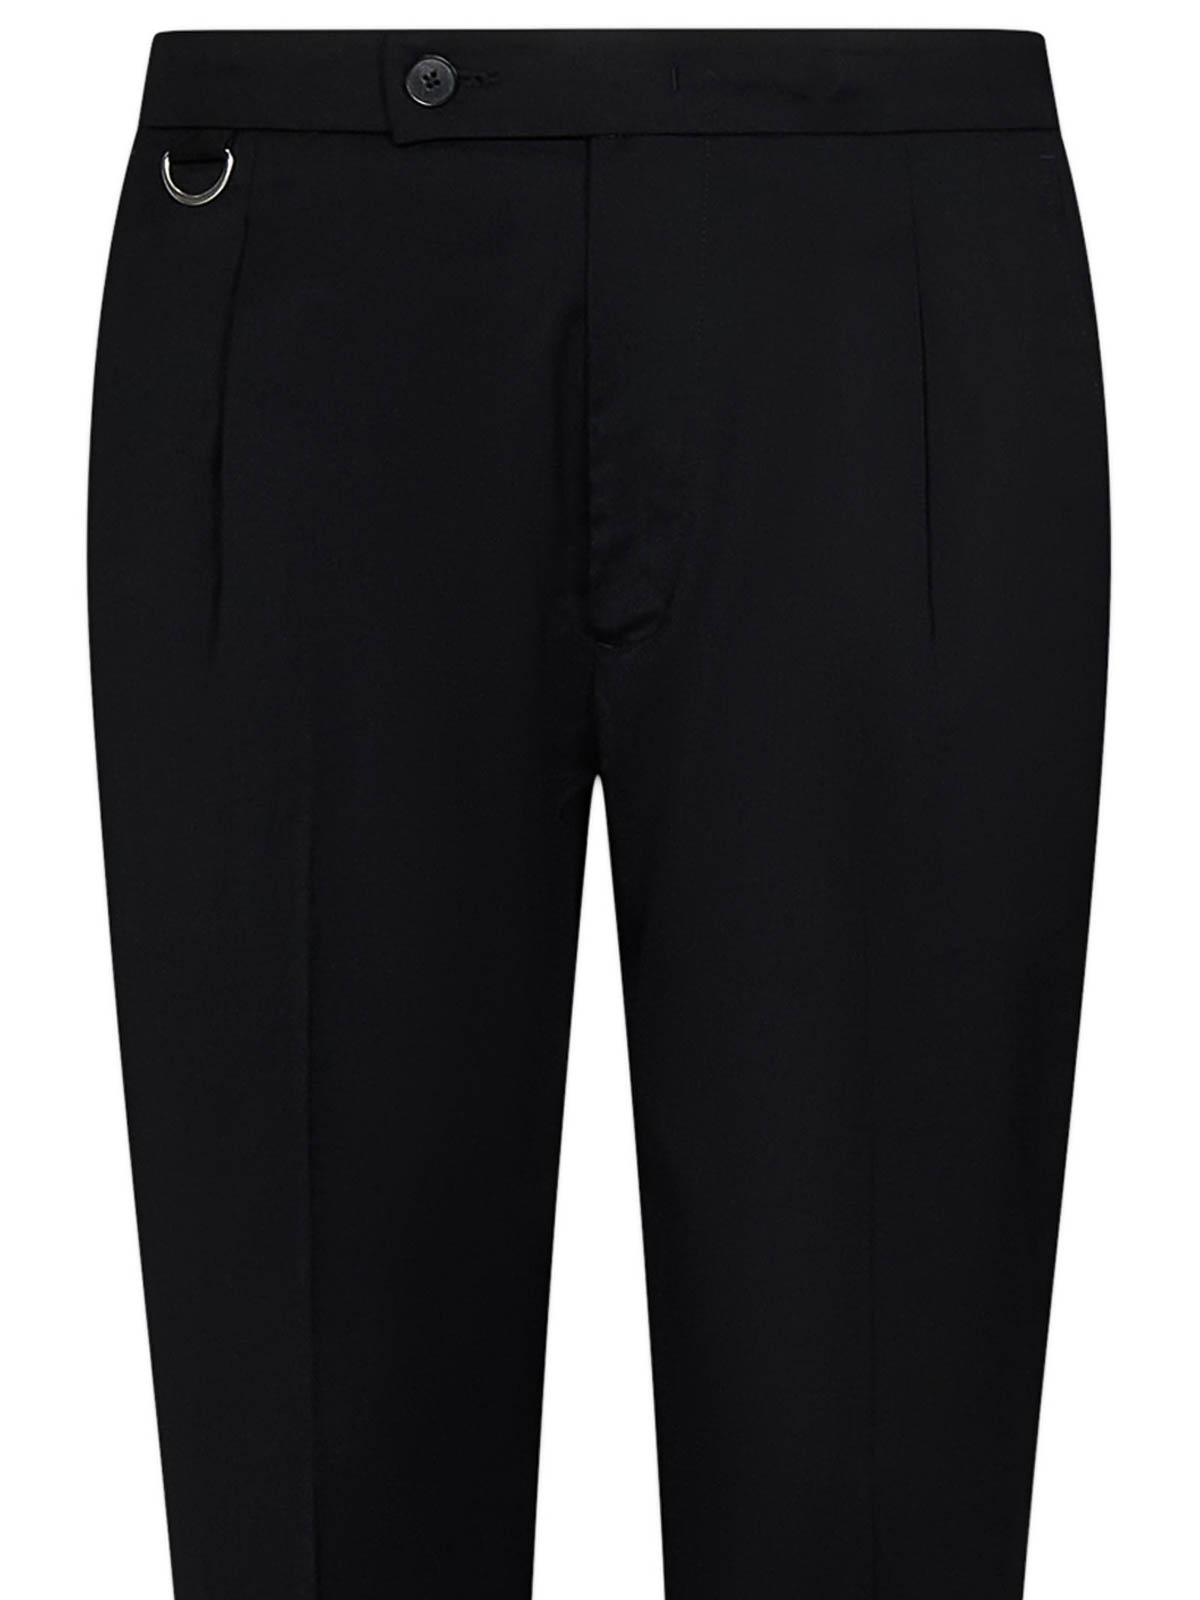 Lucky Brand Casual Women's Pants & Trousers - Macy's